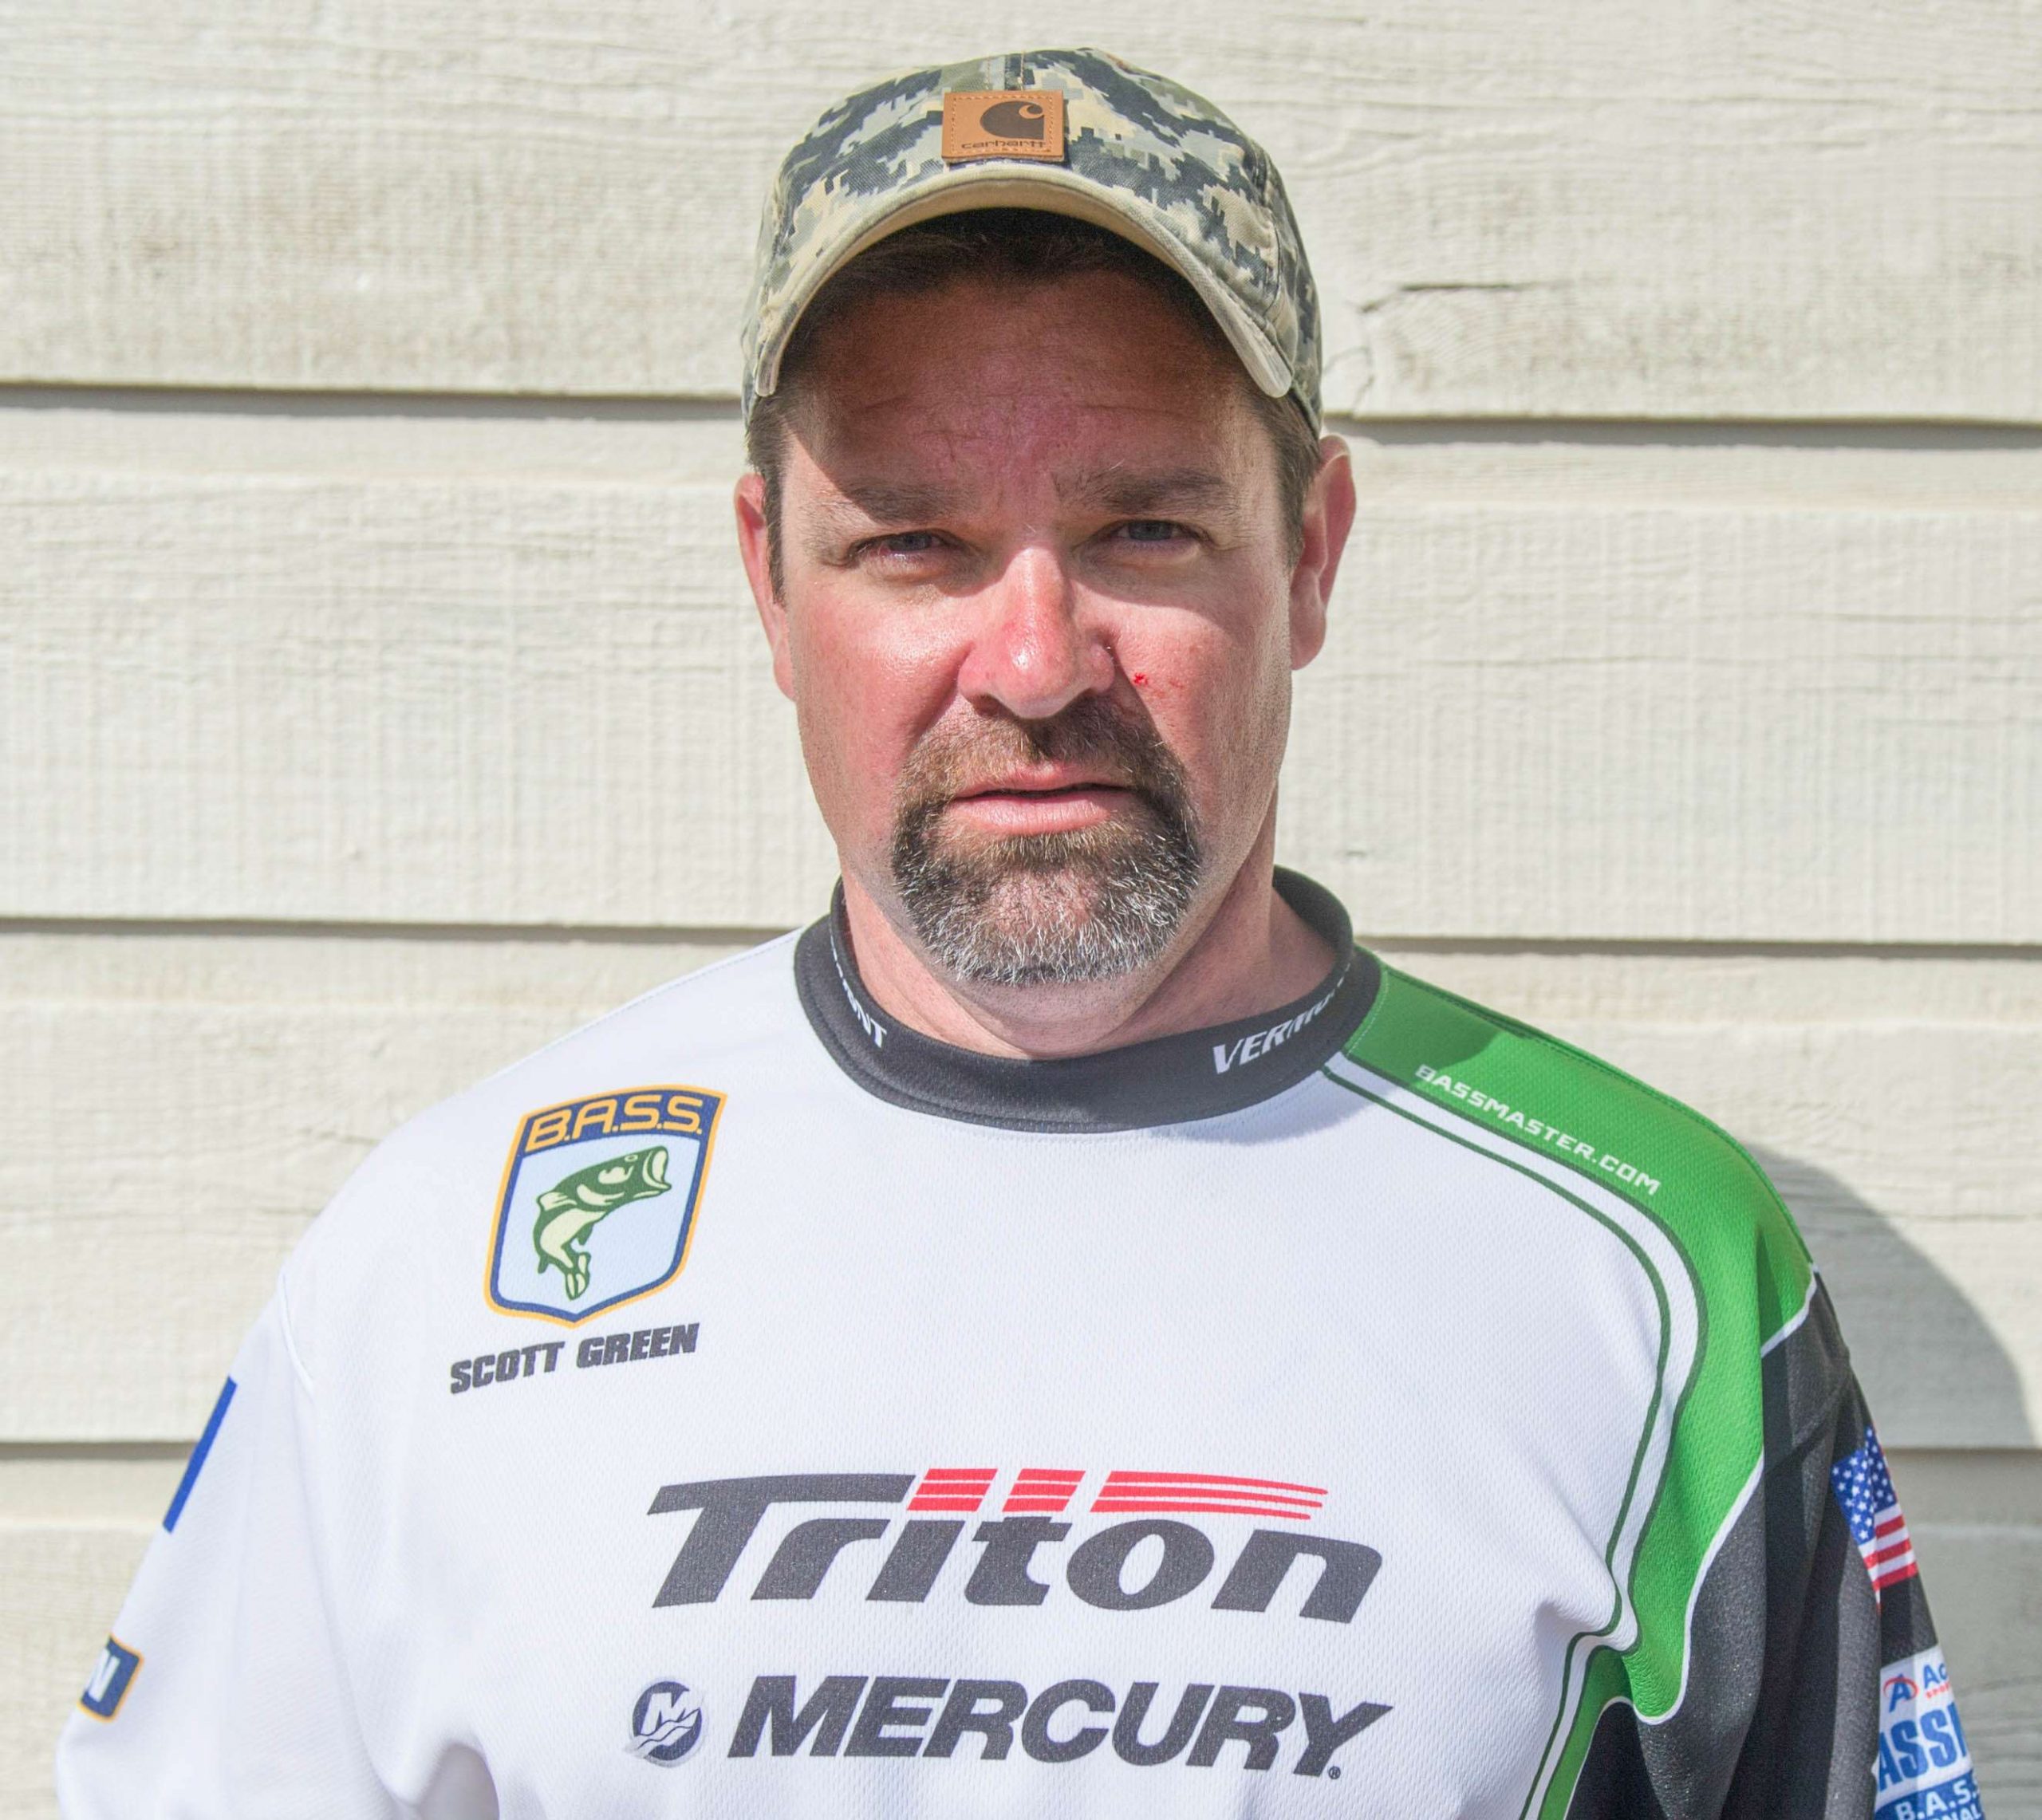 Scott Green <br>
Vermont Boater <br>
Scott Green is a member of the Champlain Valley Anglers. Heâs doing good in the world, working as a youth counselor and social worker. When heâs not making life better for those who need it most, heâs into hunting and hockey. This will be Greenâs first championship. Heâs sponsored by Lowrance, Lewâs, Krank5baits, River Rat Custom Baits and Richmond Market. 